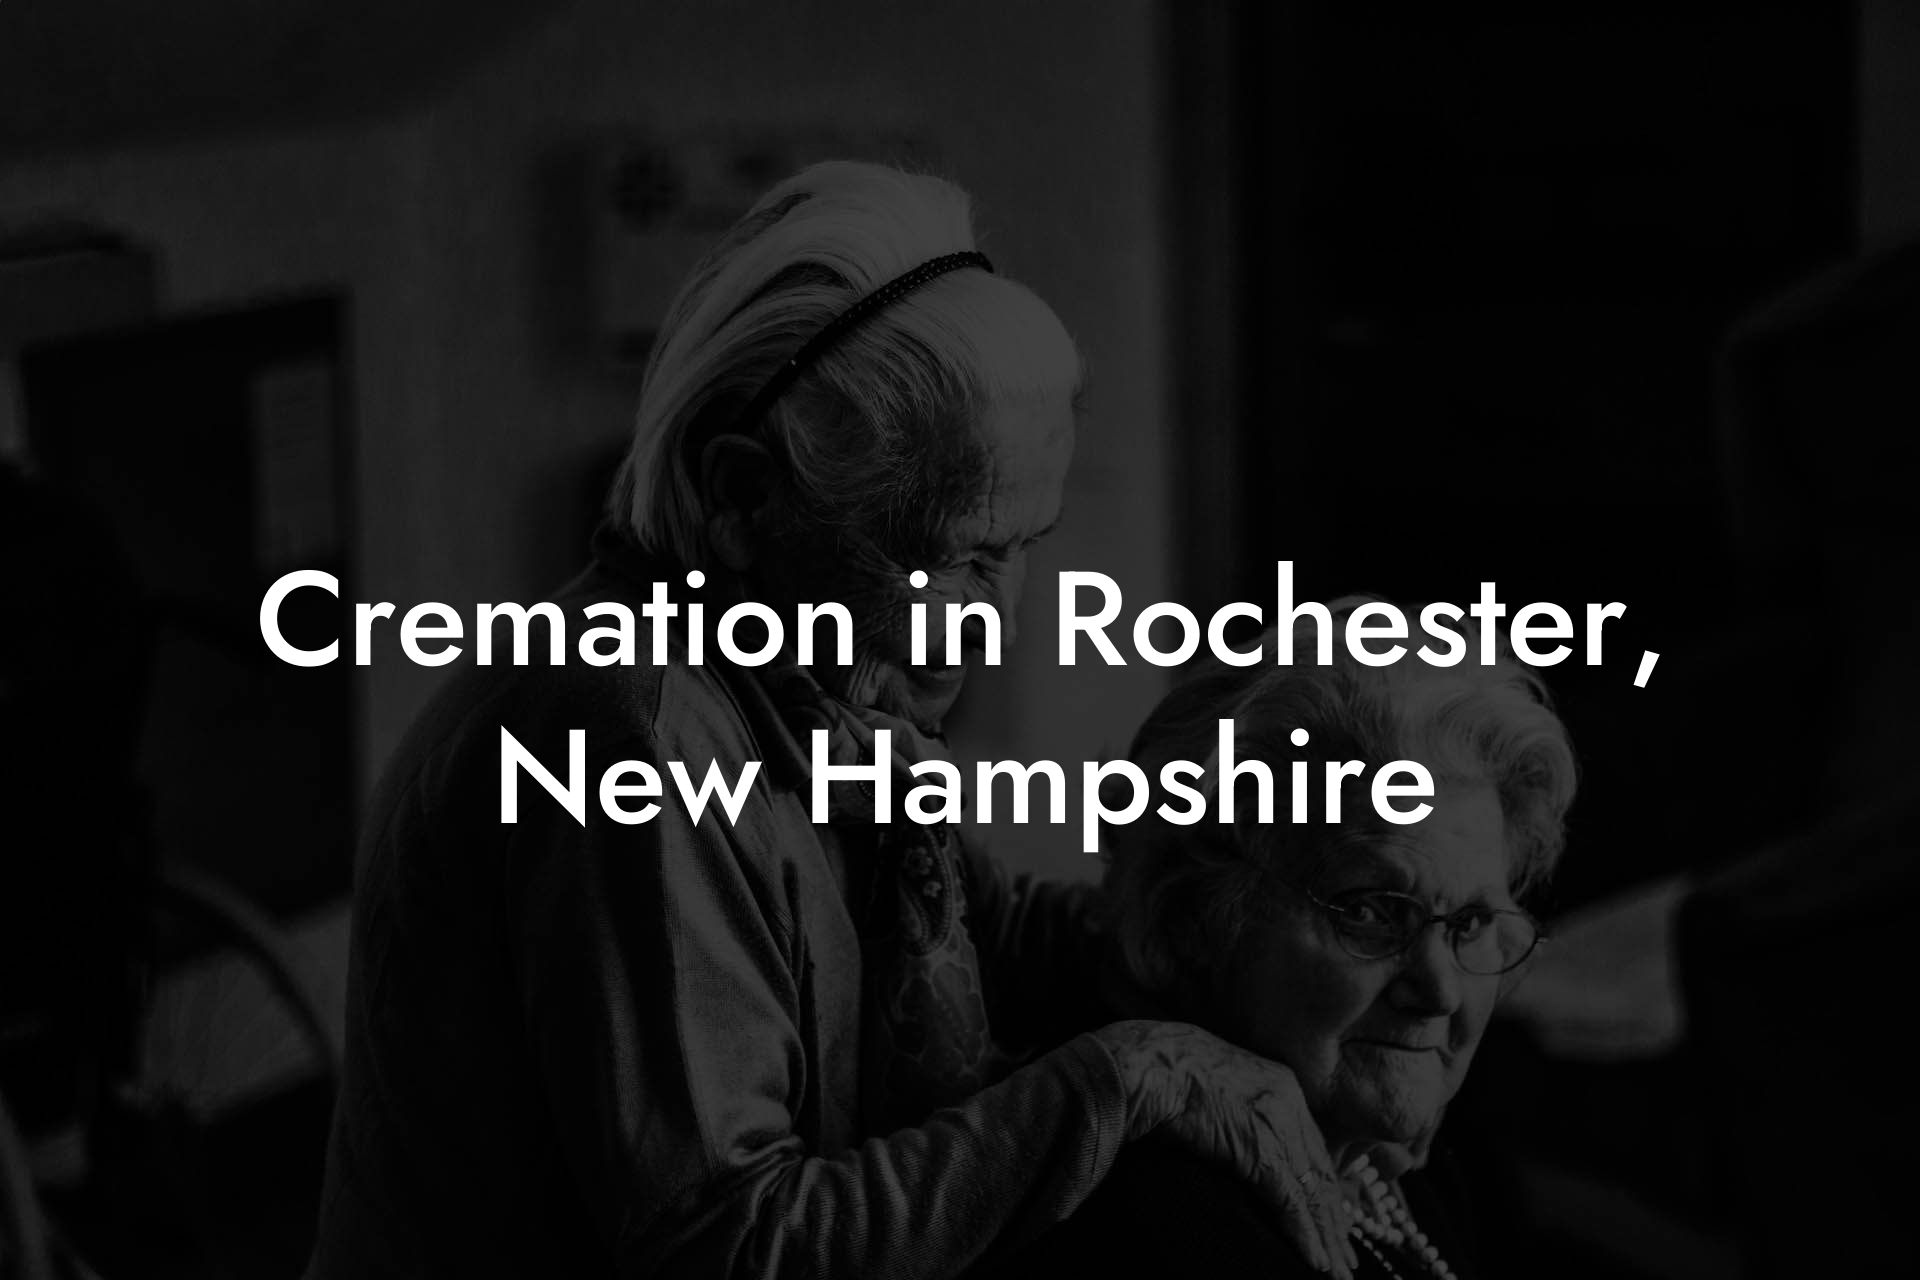 Cremation in Rochester, New Hampshire